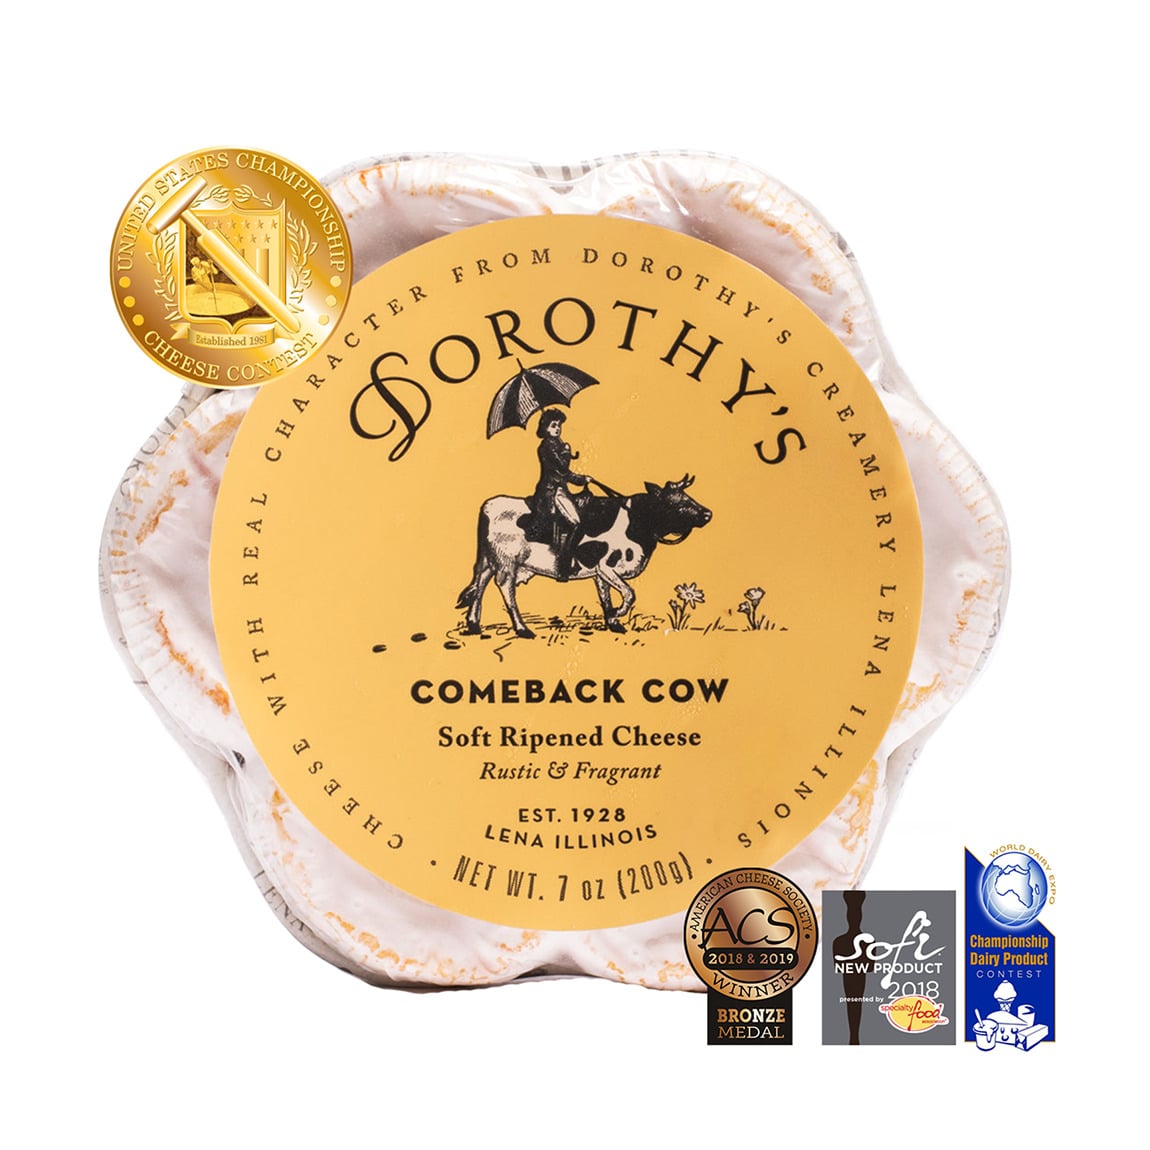 dorothy's comeback cow packaging and medals